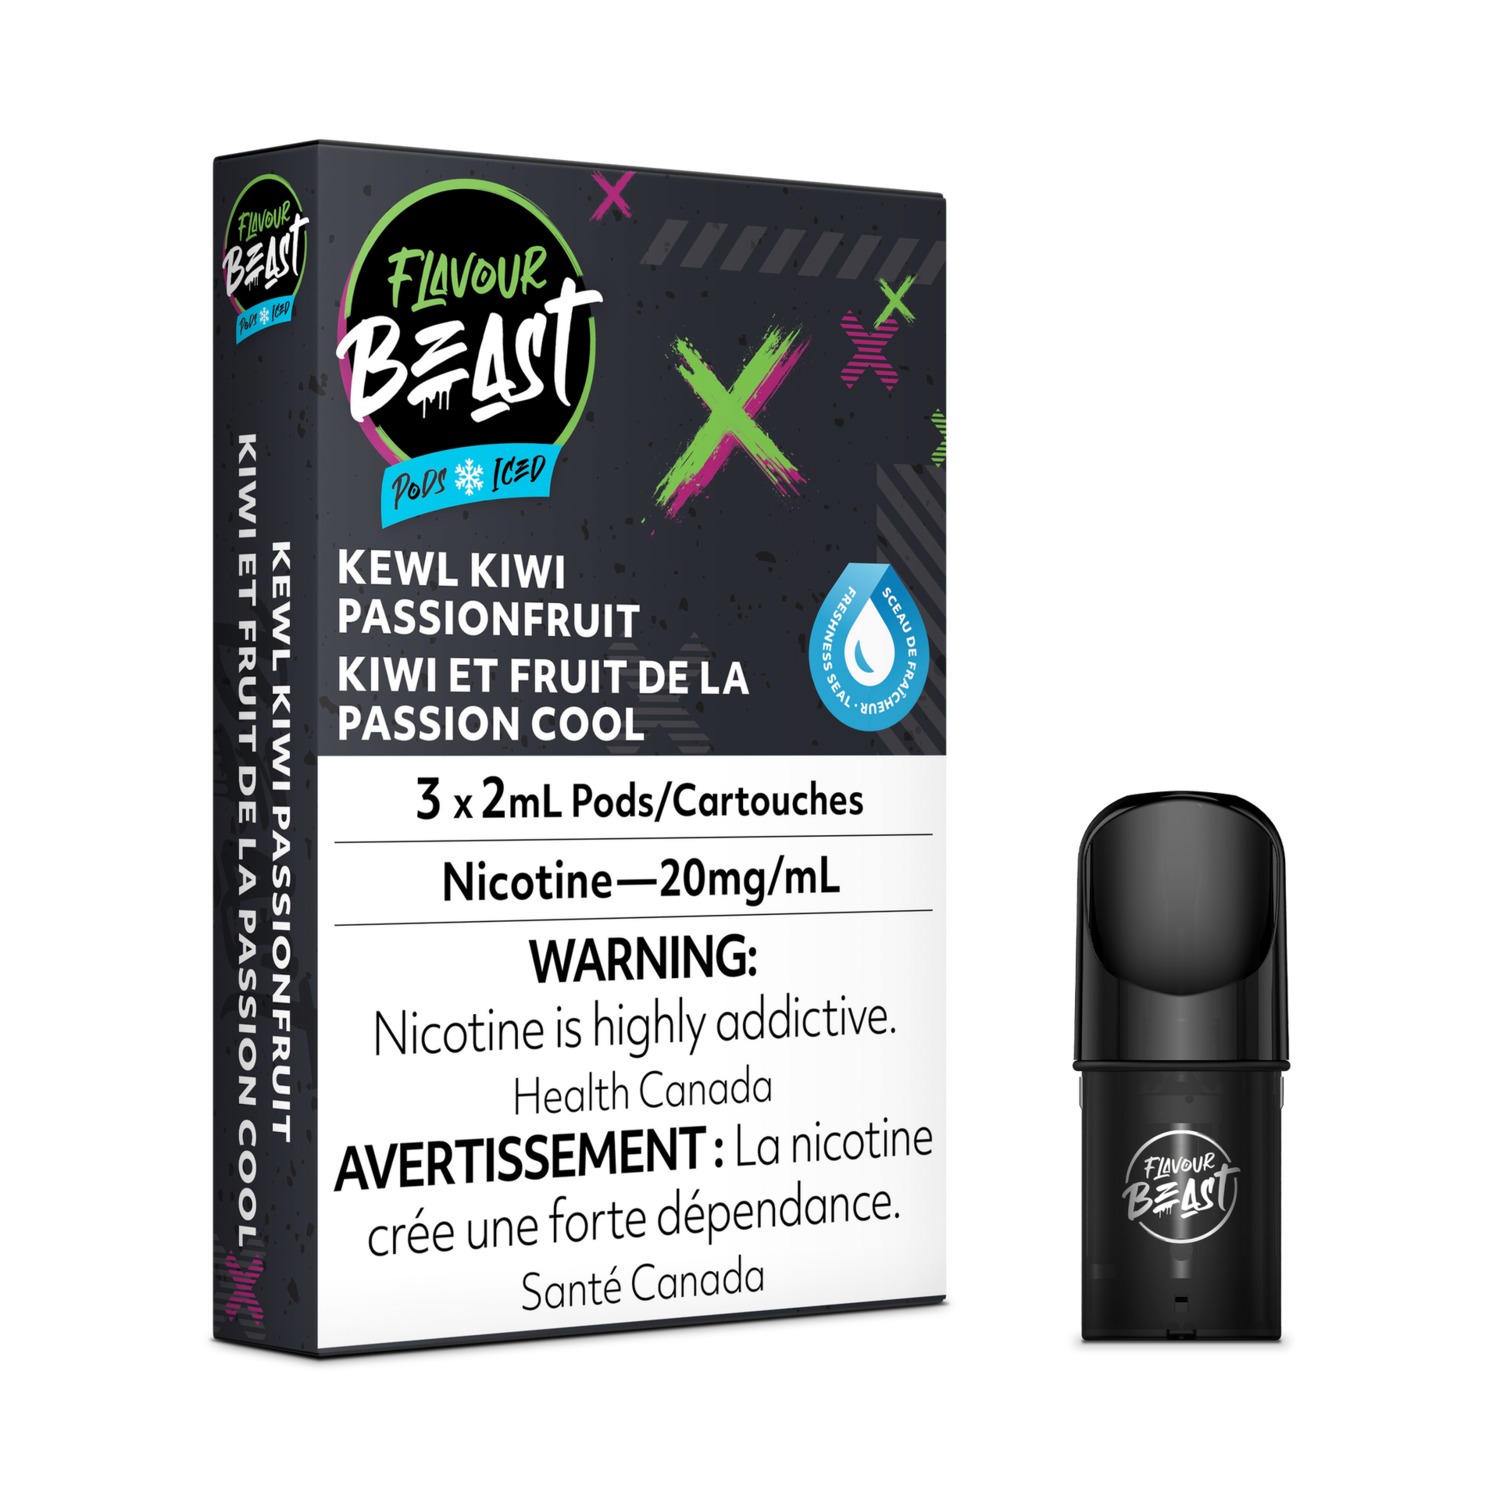 Kewl Kiwi Passionfruit Iced - Flavour Beast Pods (S-Compatible)